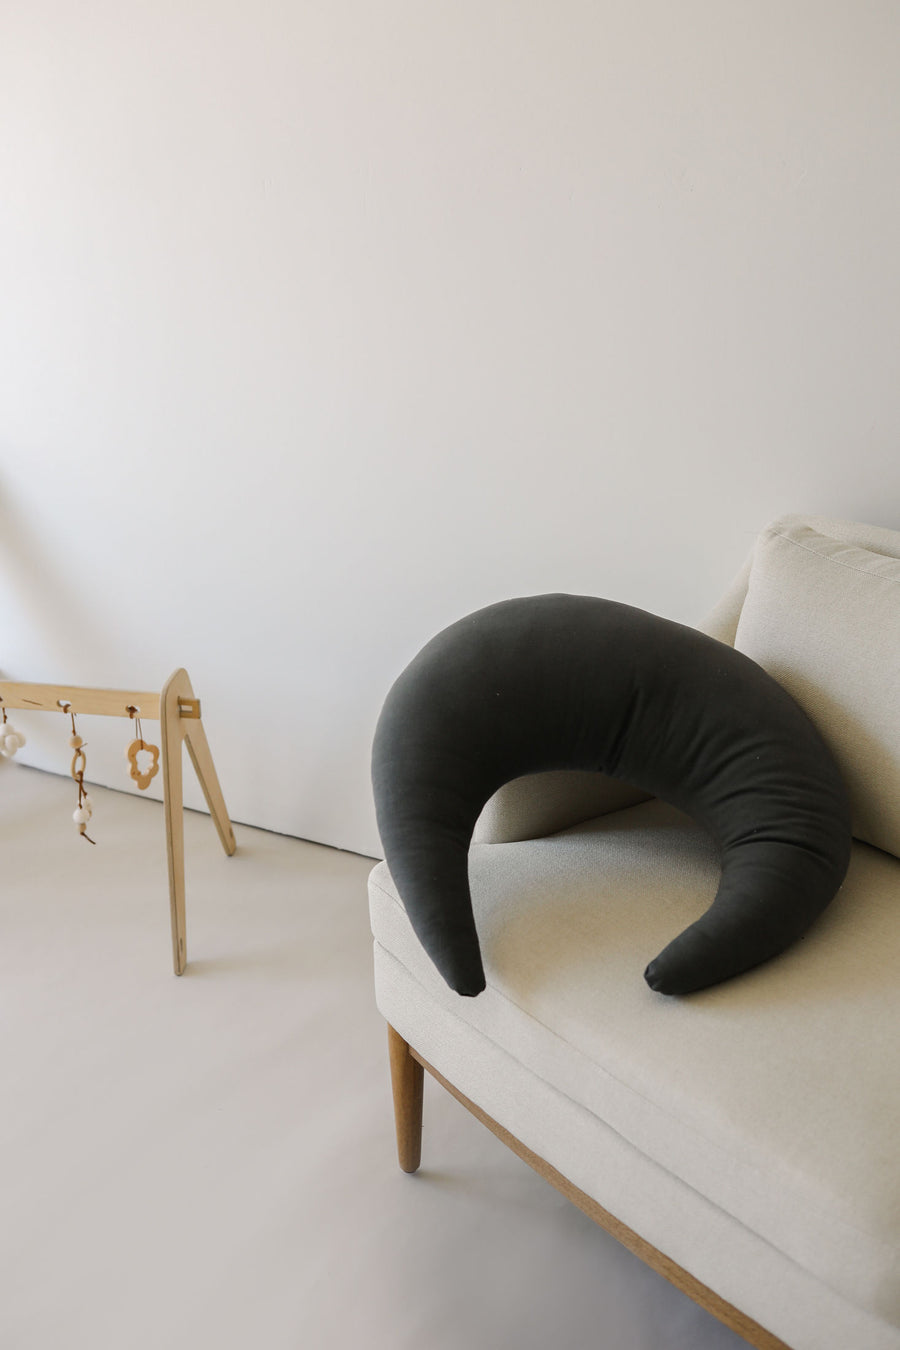 Feeding Support Pillow (Sparrow)